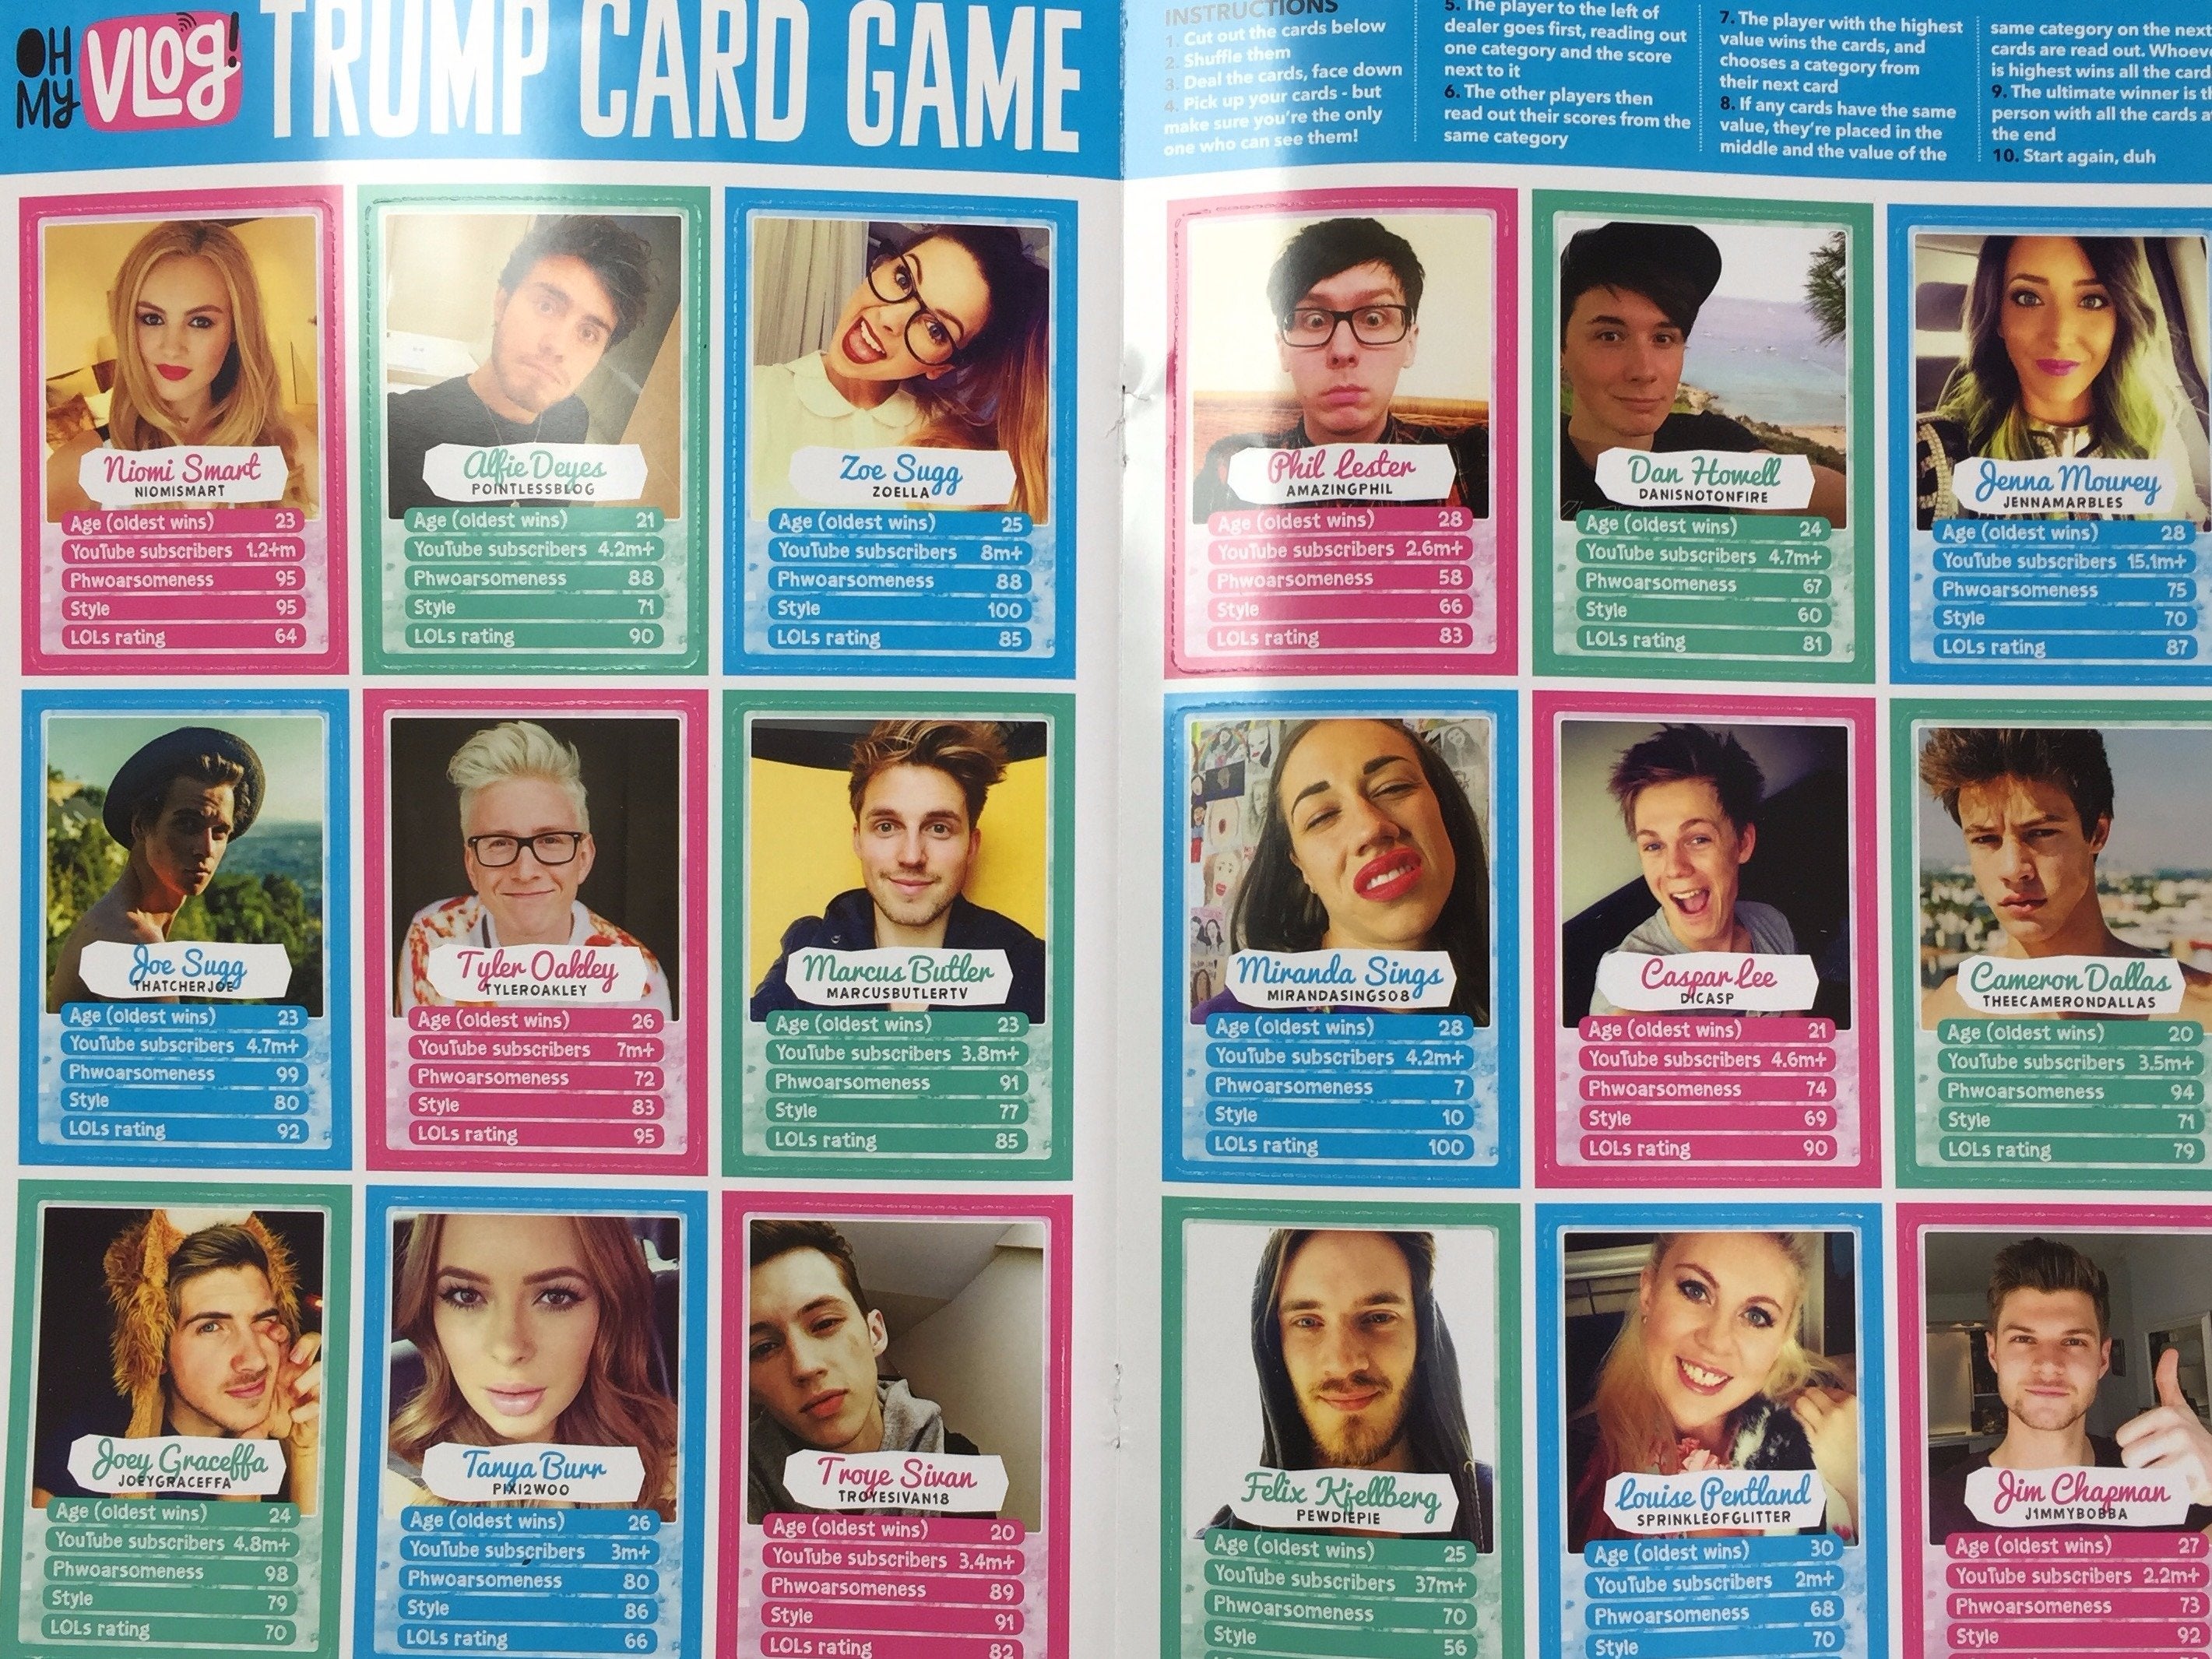 The top trumps spread that appears in Oh My Vlog! (Photo: James Cook)